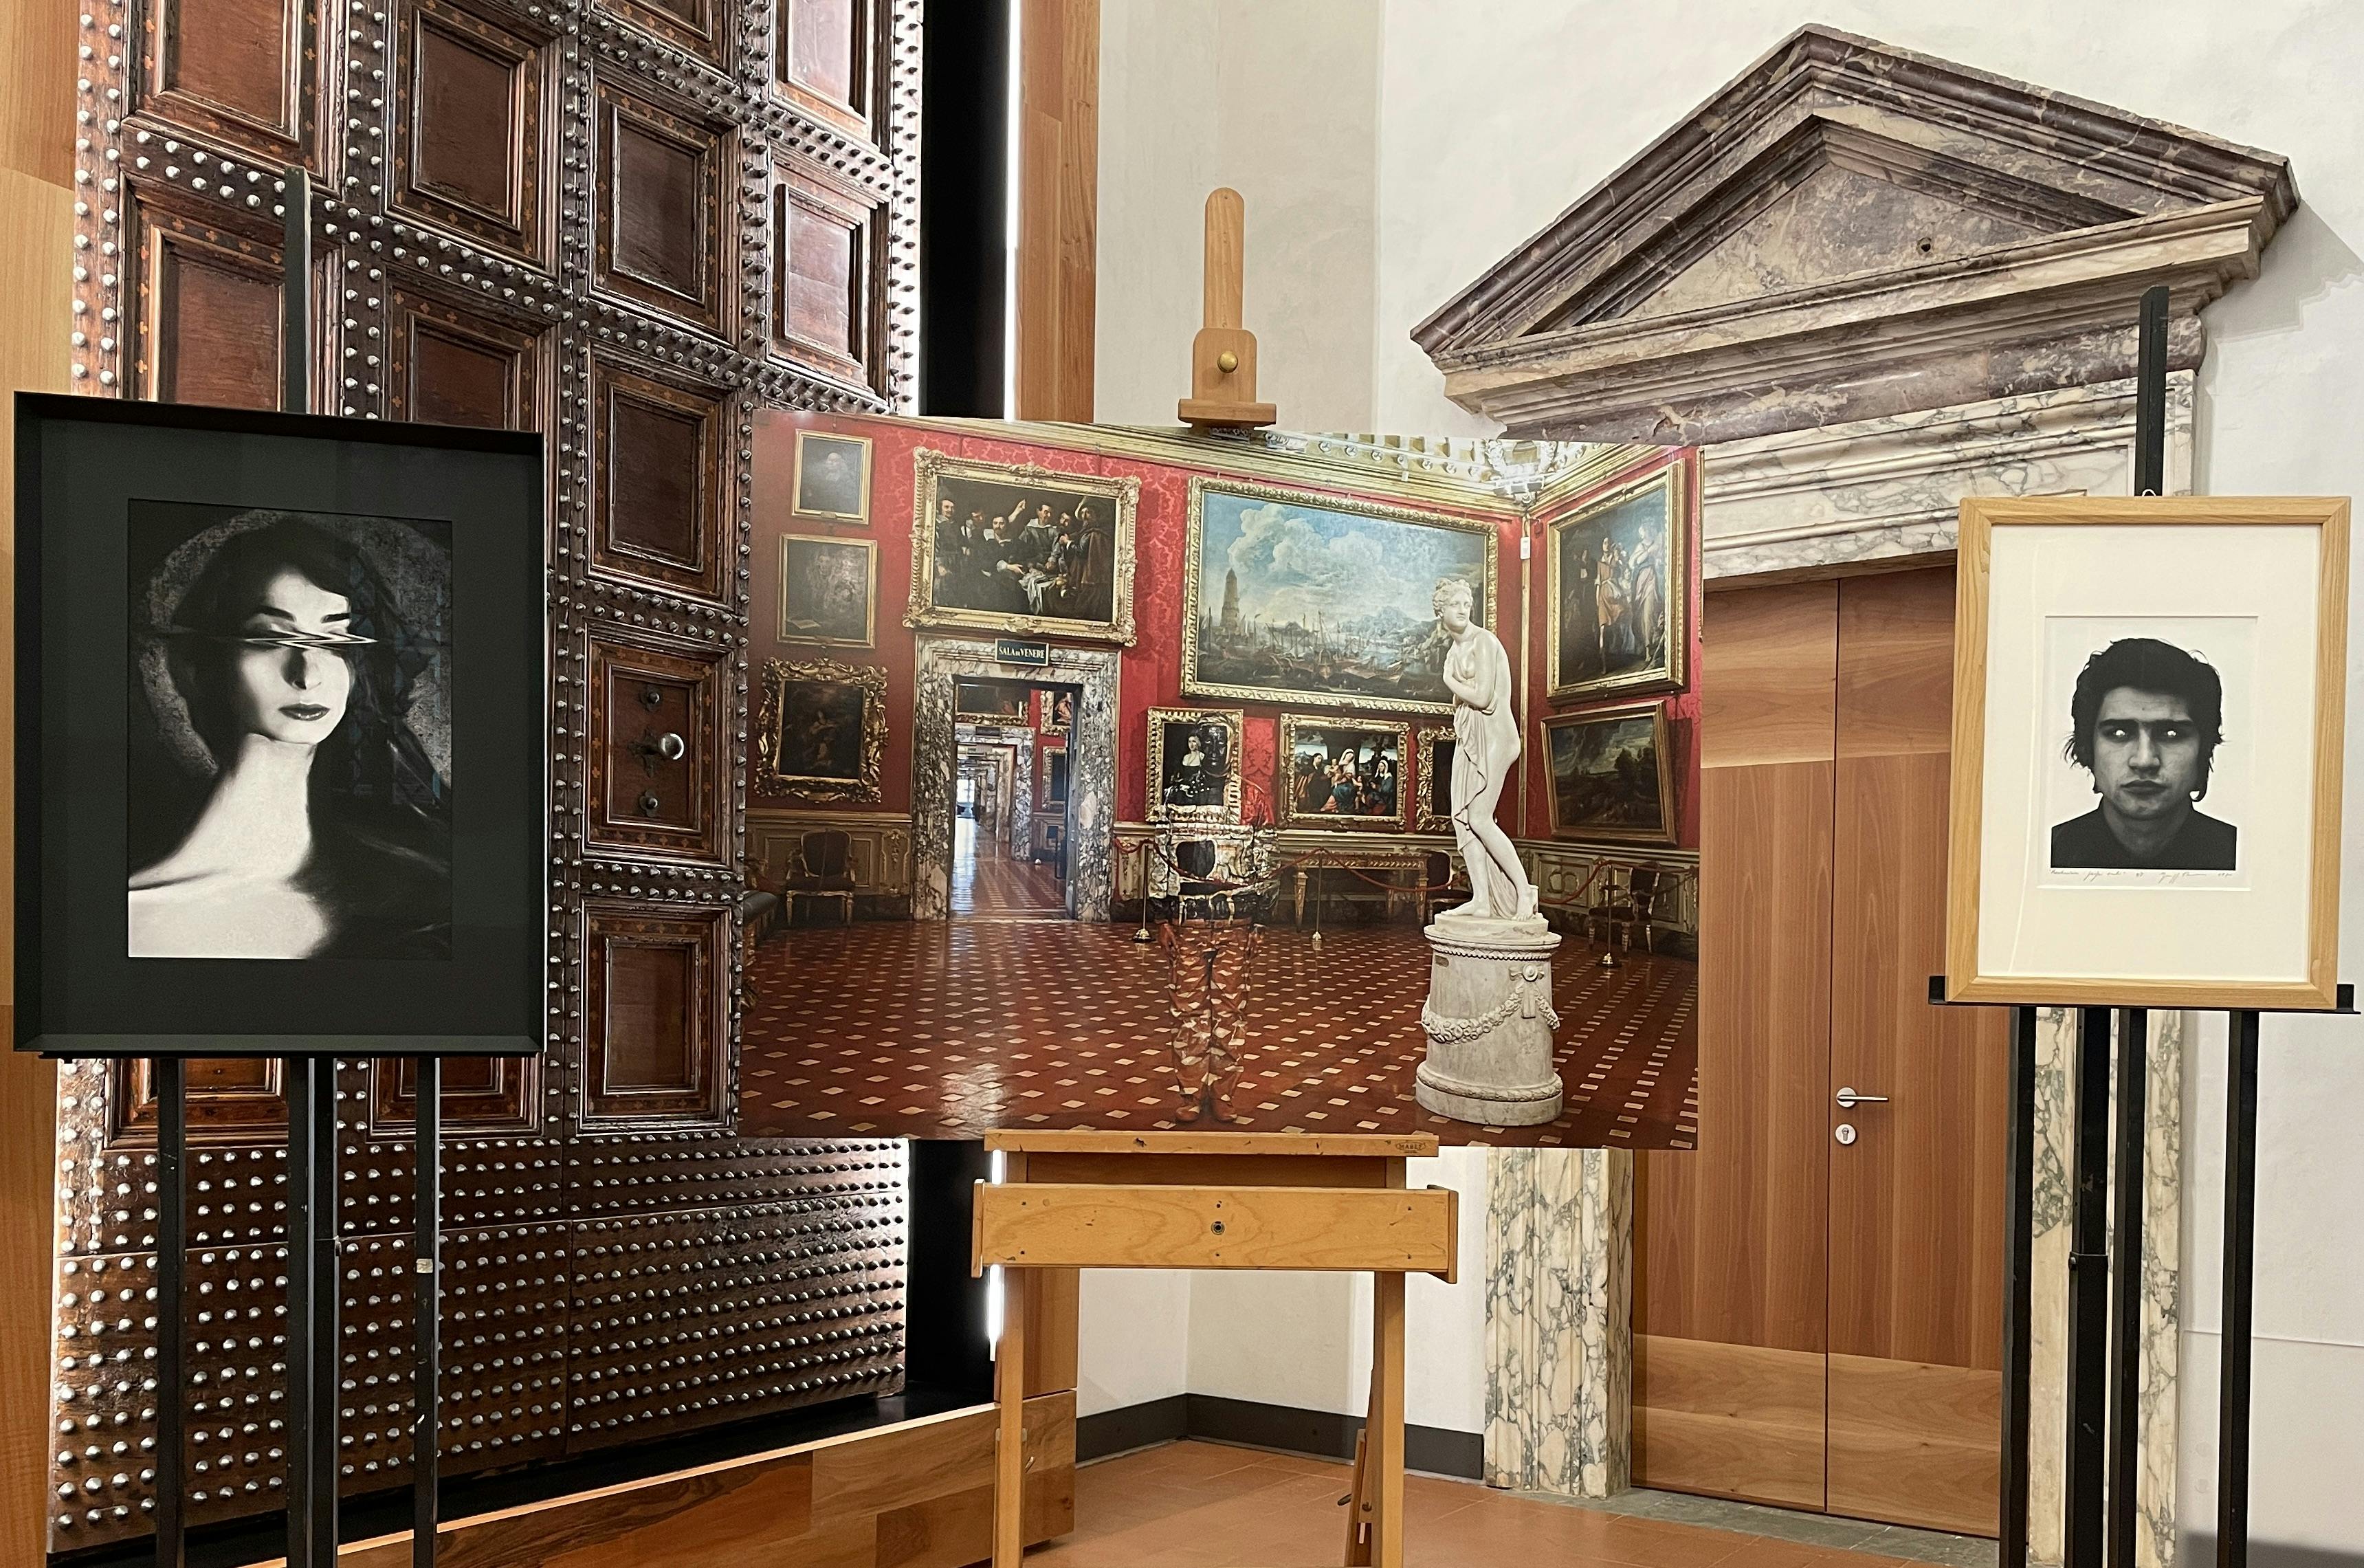 The collection of self-portraits at the Uffizi grows with the donation of three shots by contemporary artists